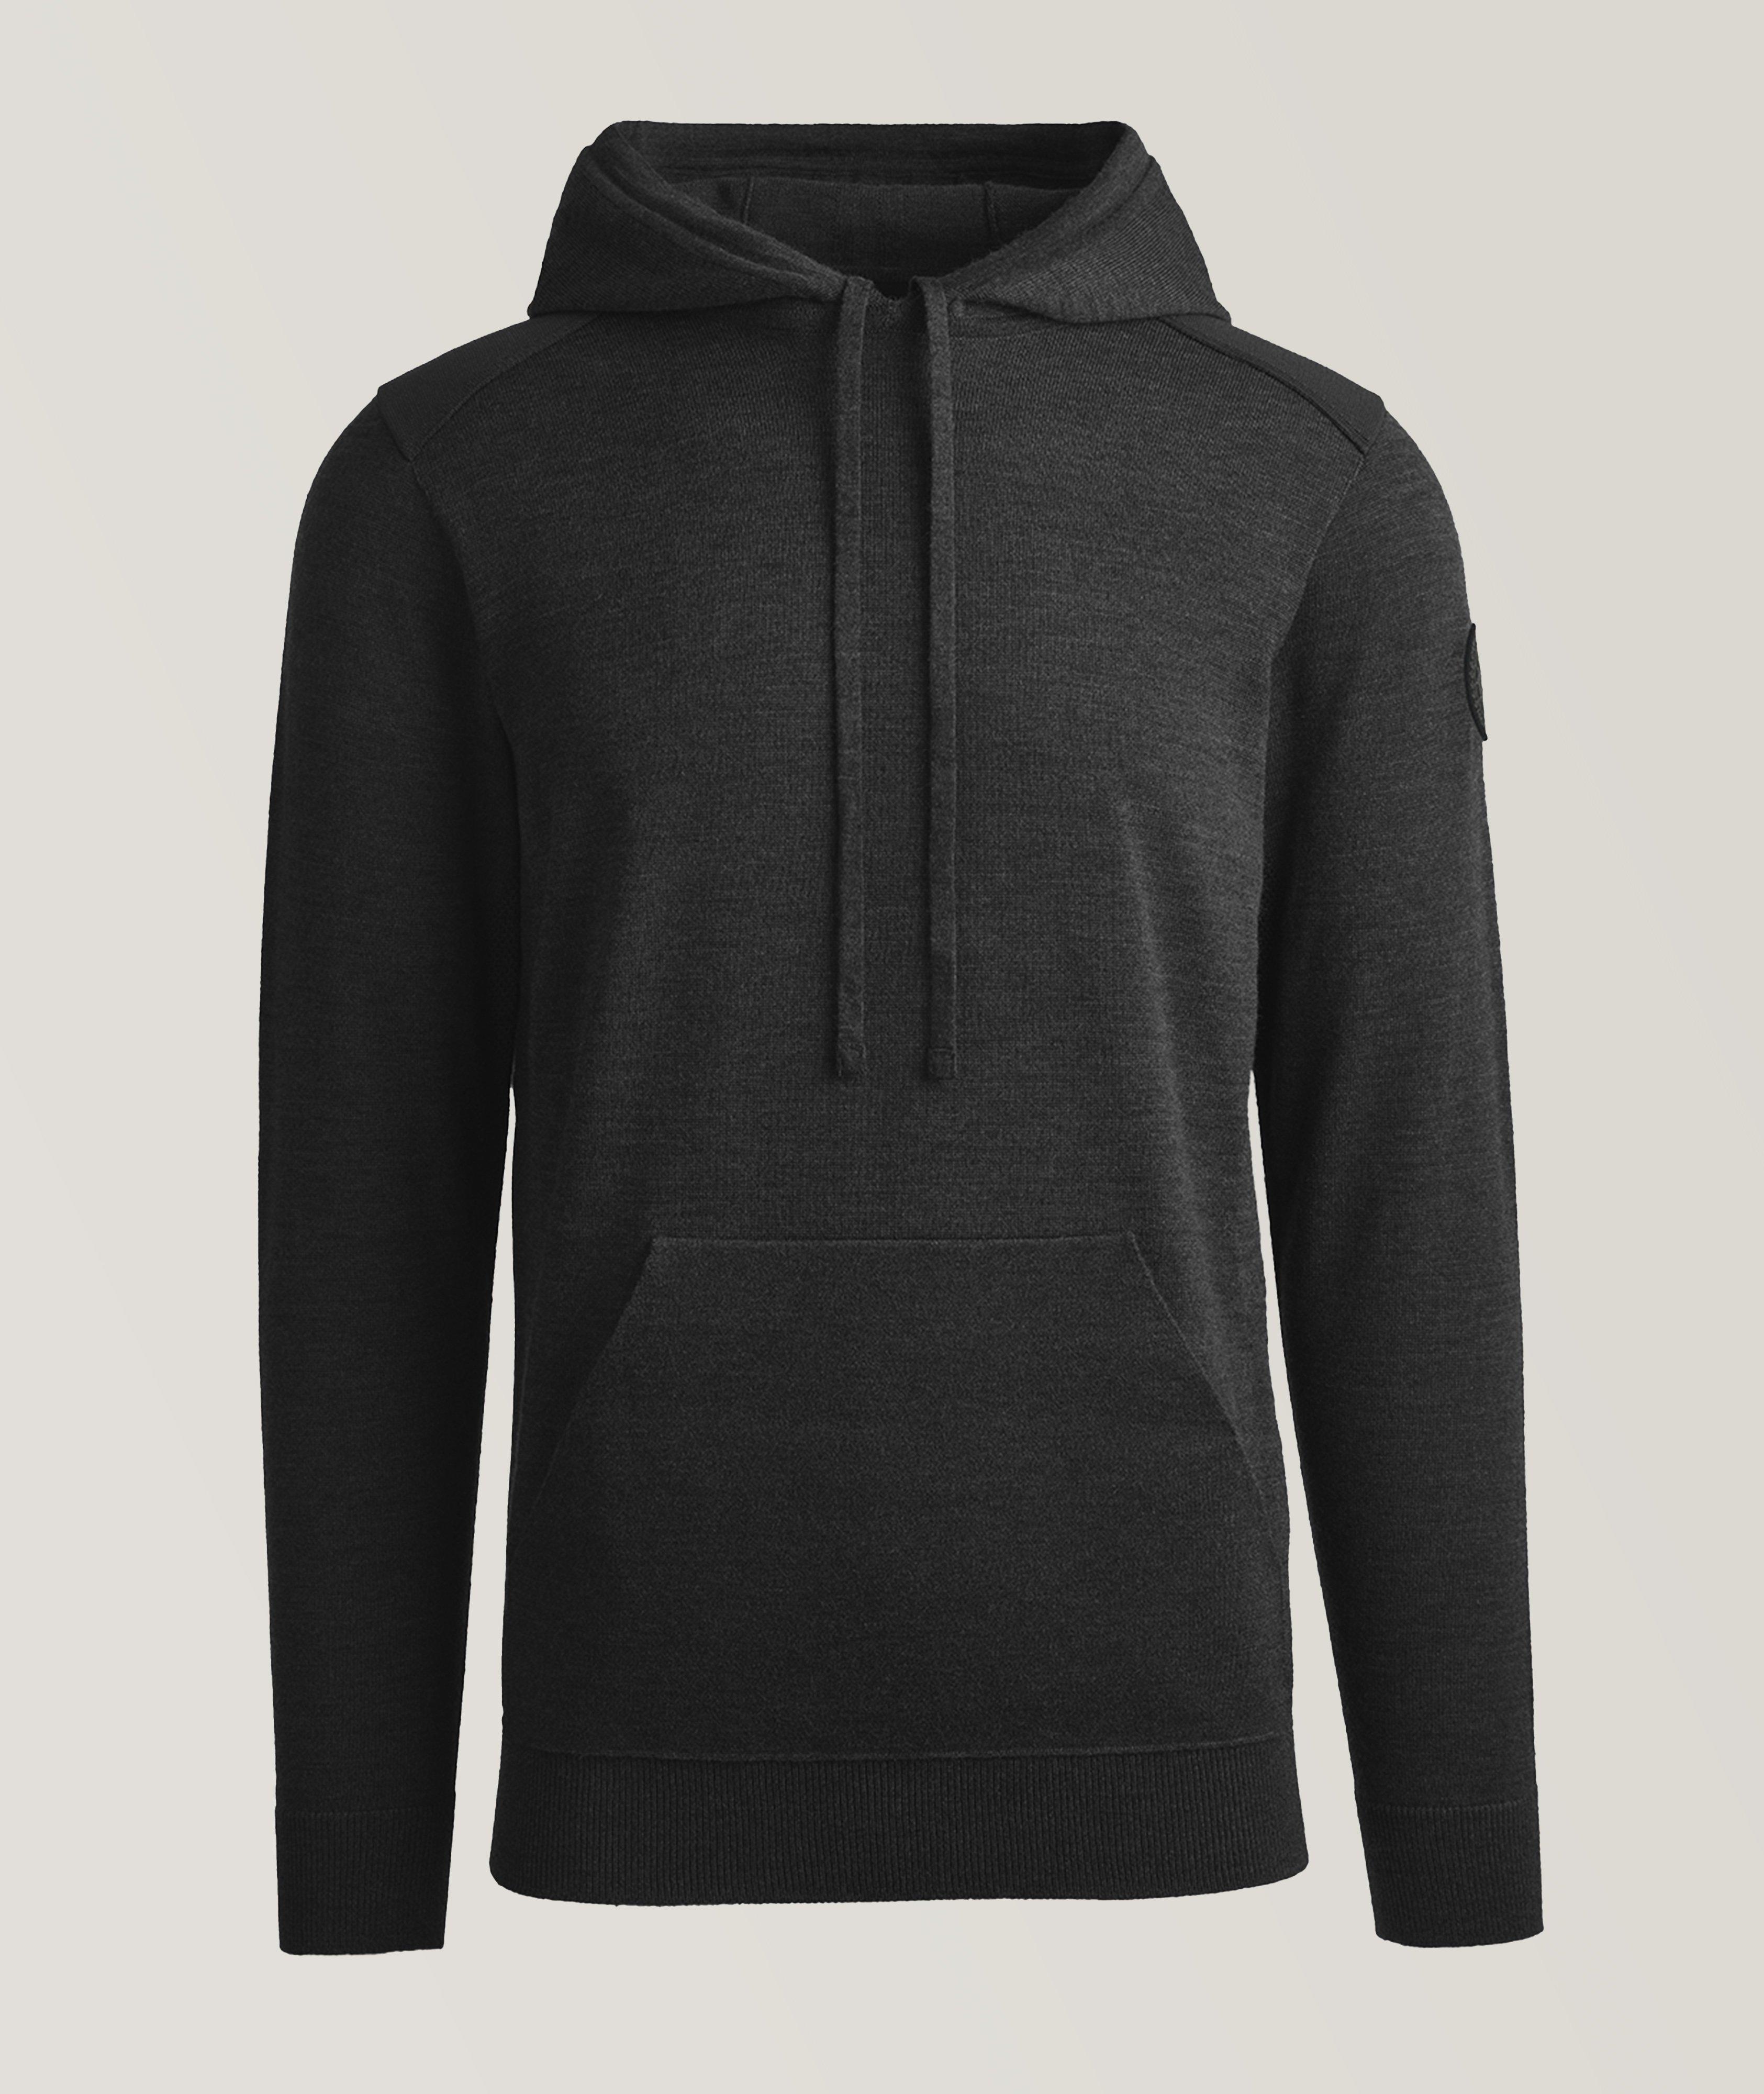 Amherst Hooded Sweater image 0